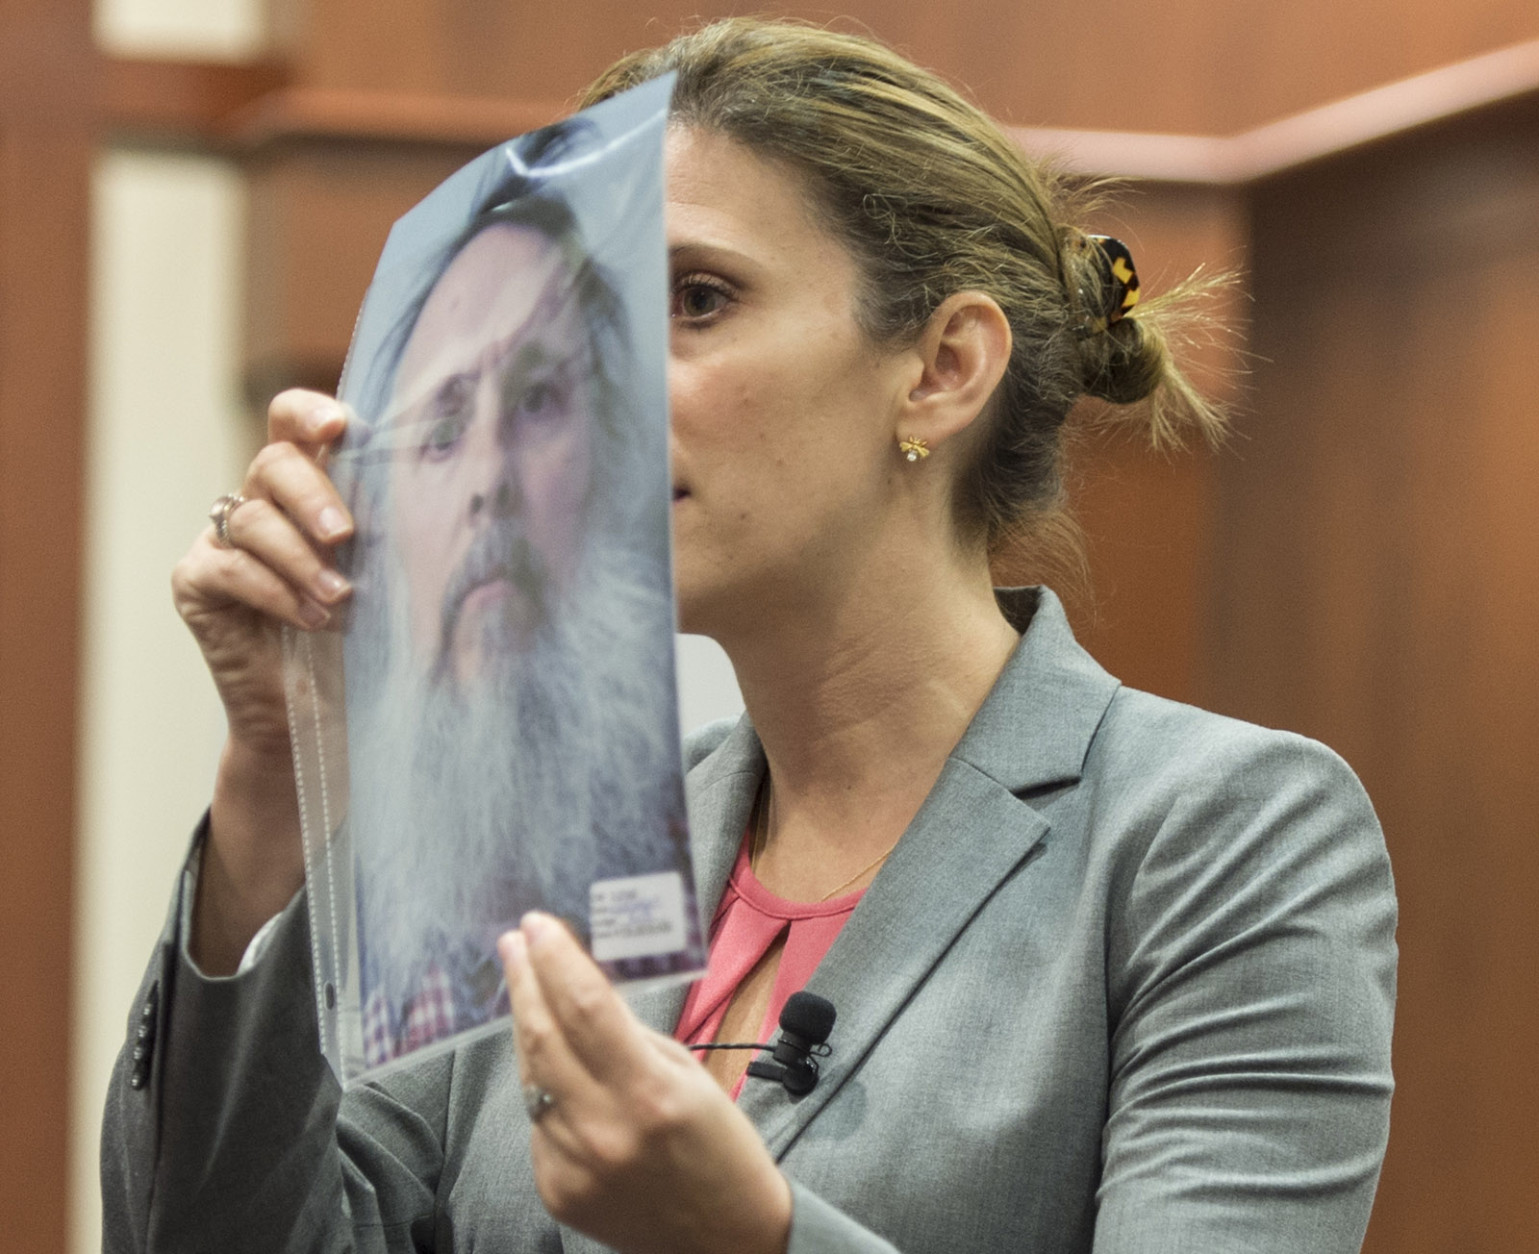 Defense attorney Megan Thomas holds up a photo of Charles Severance during closing arguments in his trial at the Fairfax County Circuit Court in Fairfax, Virginia, on Wednesday, October 28, 2015. (Pool Photo by Nikki Kahn/The Washington Post)